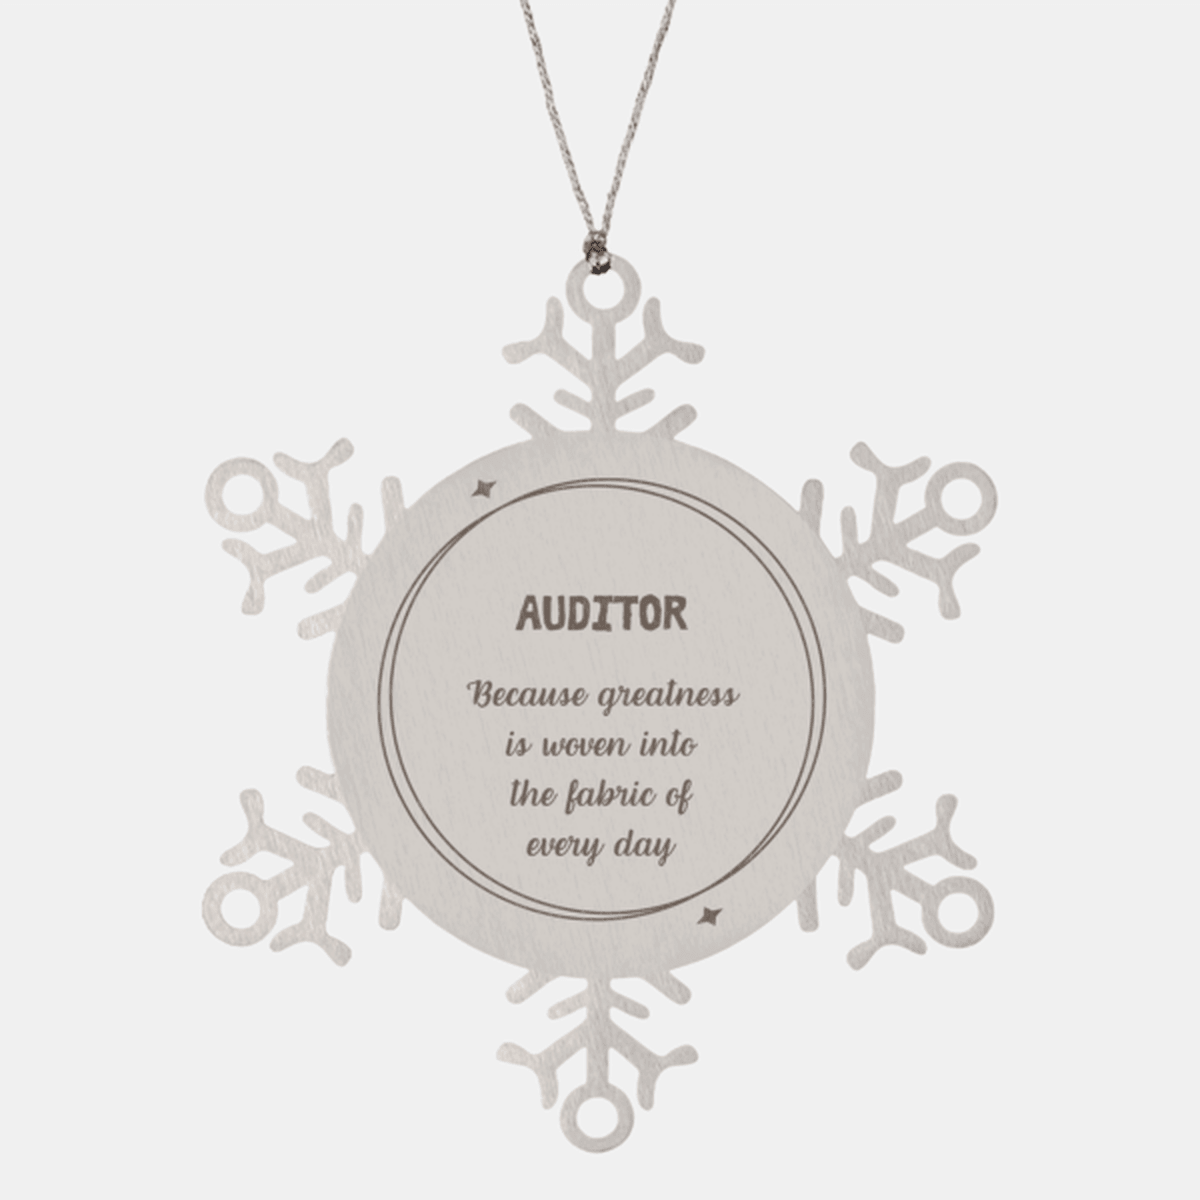 Sarcastic Auditor Snowflake Ornament Gifts, Christmas Holiday Gifts for Auditor Ornament, Auditor: Because greatness is woven into the fabric of every day, Coworkers, Friends - Mallard Moon Gift Shop